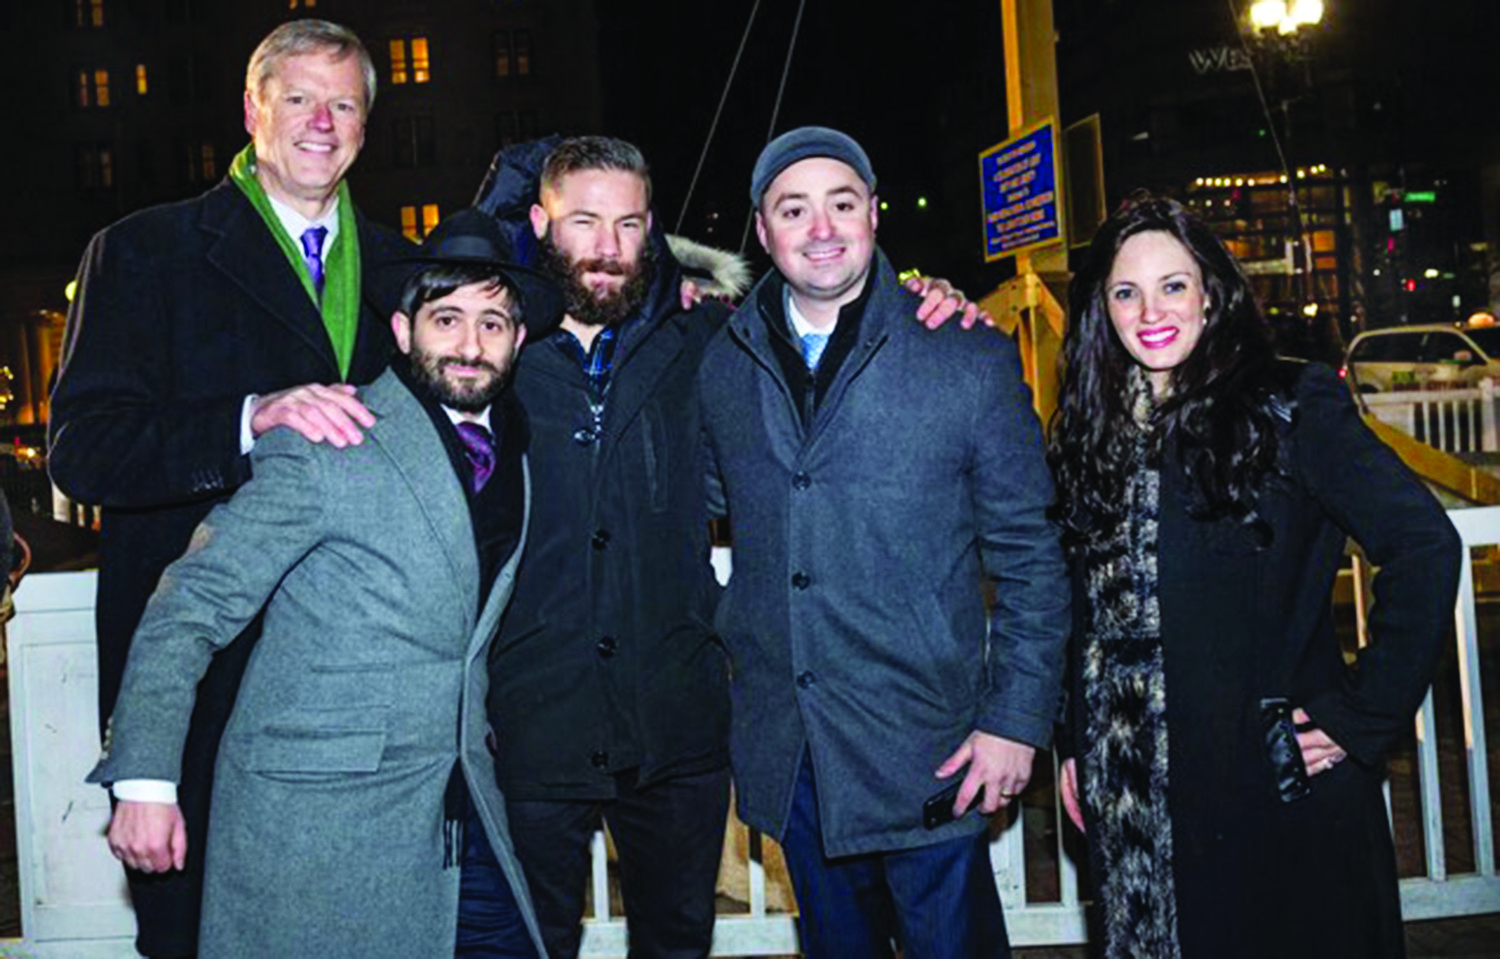 In Massachusetts, New England Patriots player Julian Edelman, above, lights the menorah in Copley Square (in the lift with him are Governor Charlie Baker and Emily Becker whose family are Chabad supporters).
And later, left, at the event that took place Dec. 6, Edelman is pictured with, (left to right)  Governor Charlie Baker, Rabbi Mayer  Zarchi of Chabad Boston,  Boston Councilman Josh Zakim, and Rebbetzin Chenchie Zarchi.